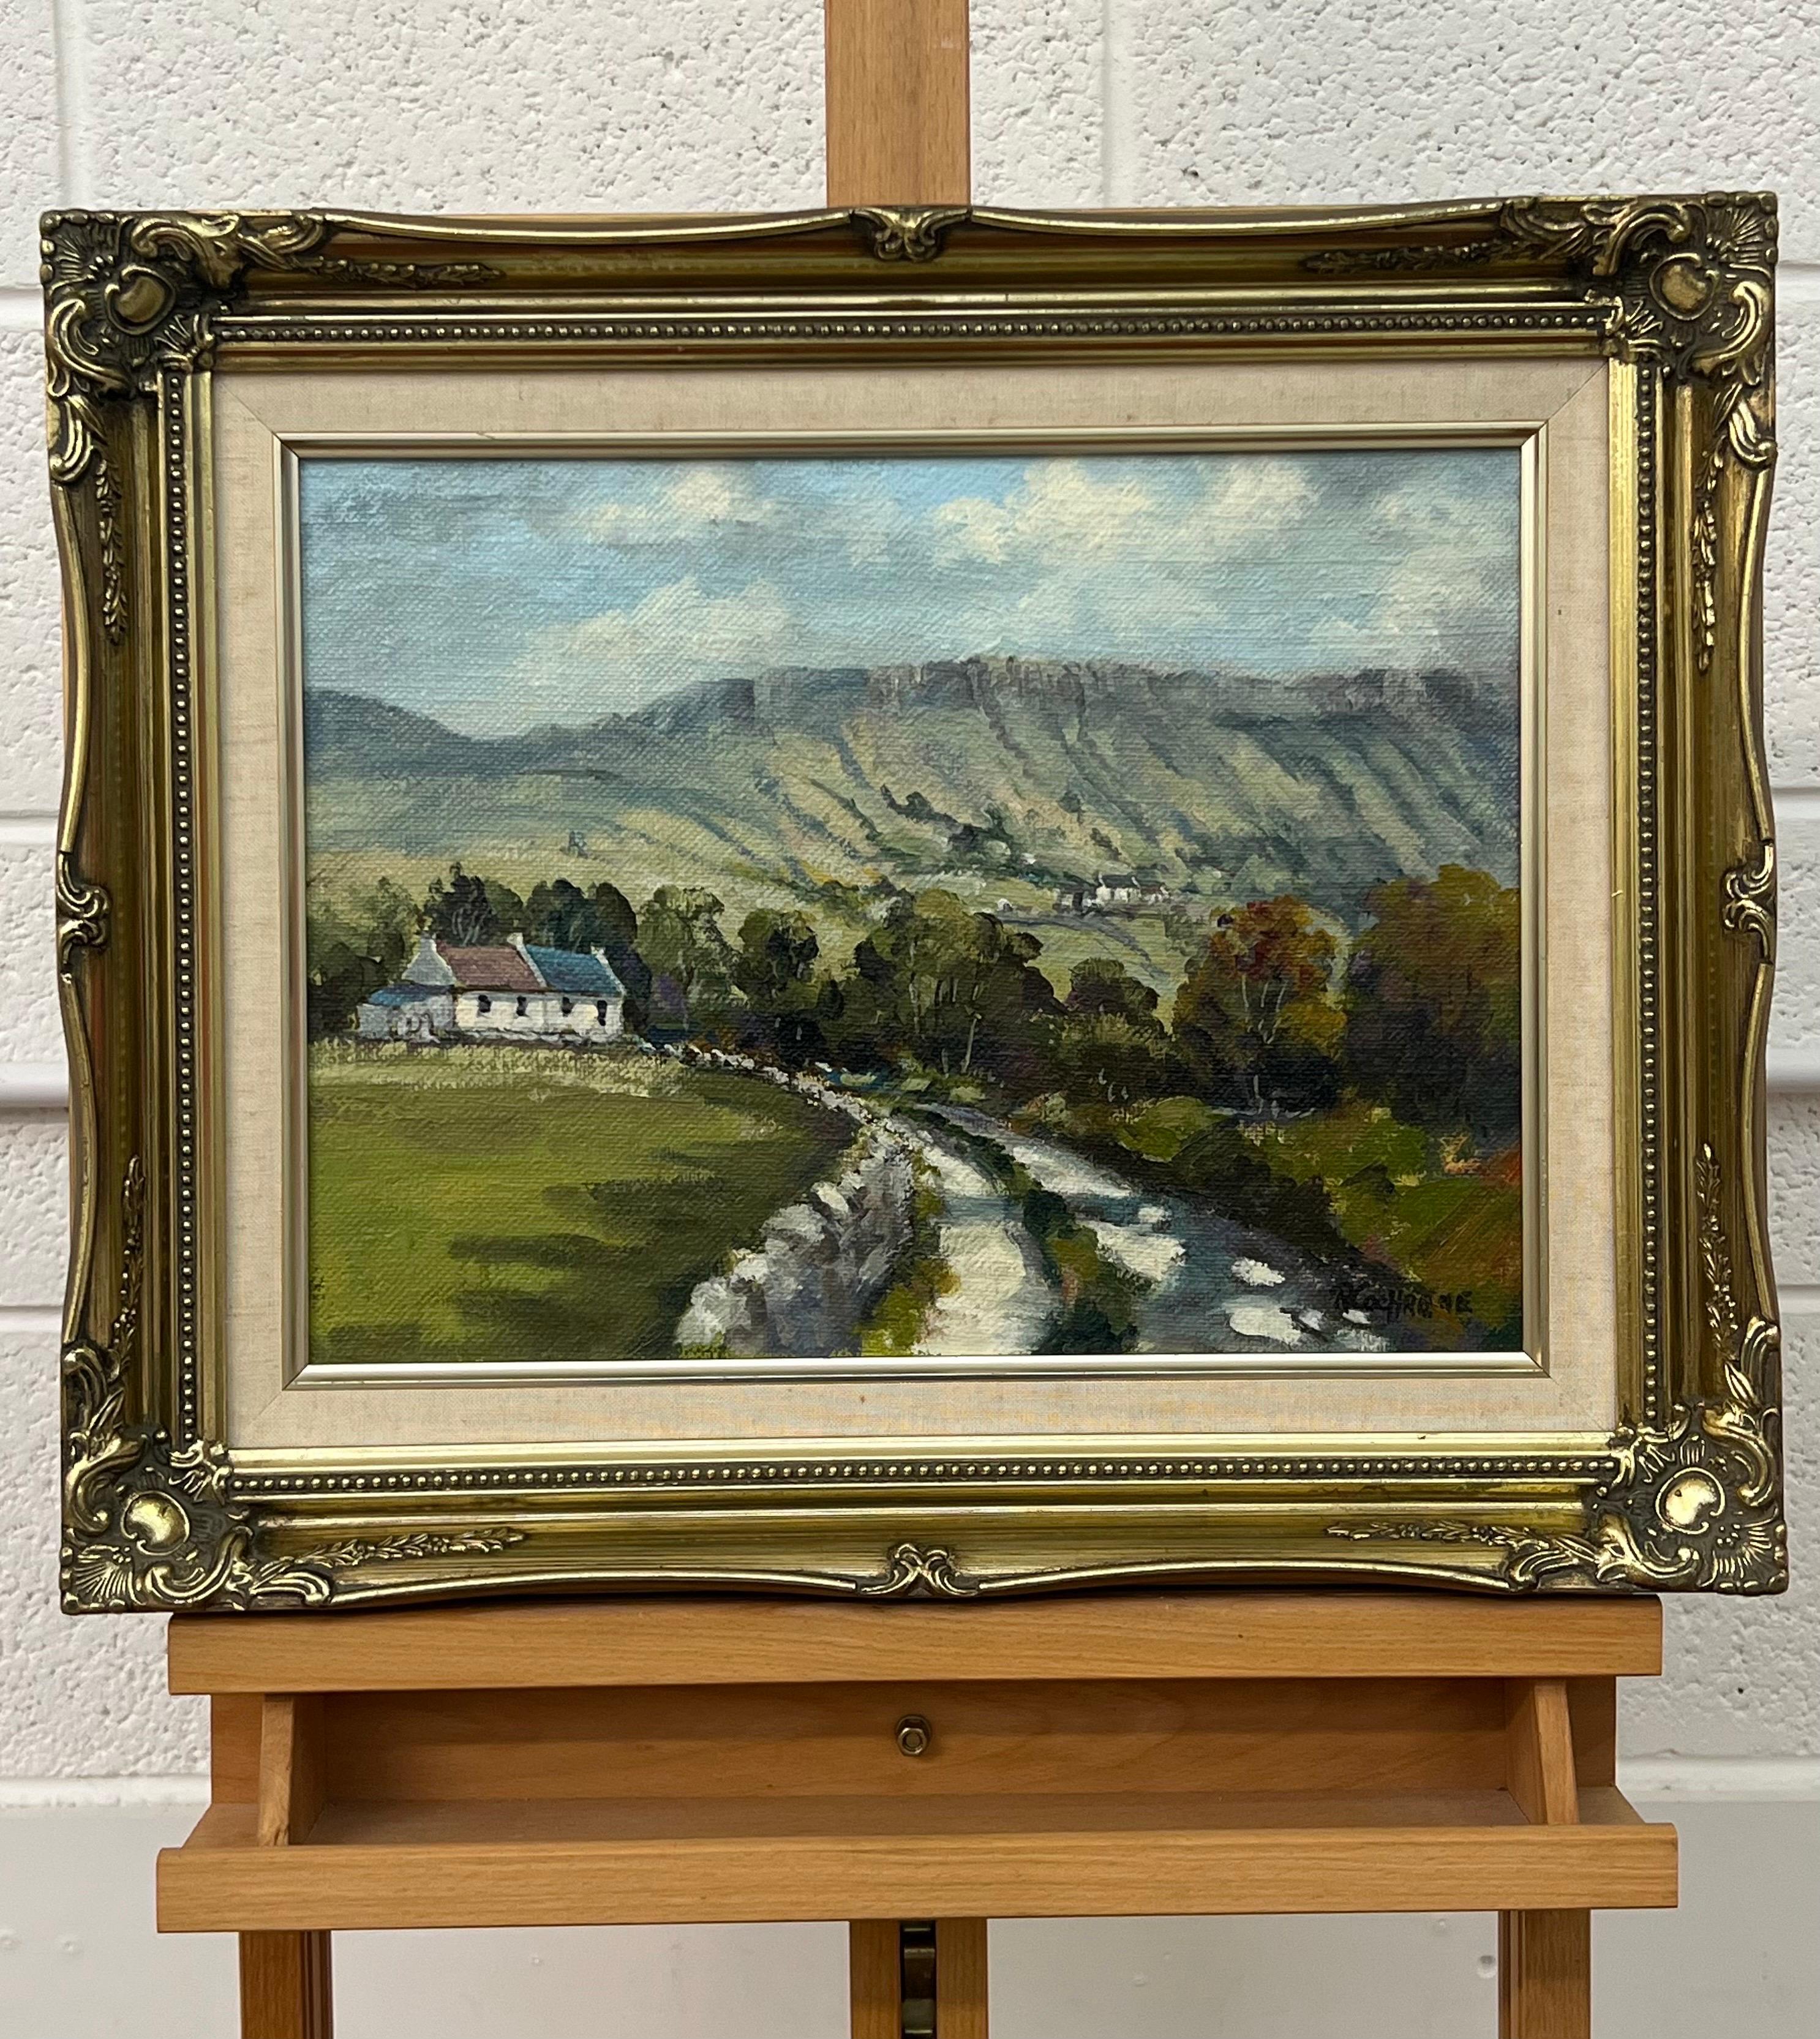 Vintage Post-Impressionist Oil Painting of Ireland Countryside by 20th Century Irish Artist, Ray Cochrane. 

Art measures 16 x 12 inches 
Frame measures 21 x 17 inches 

This impressionistic 1980's vintage original is signed and presented in a